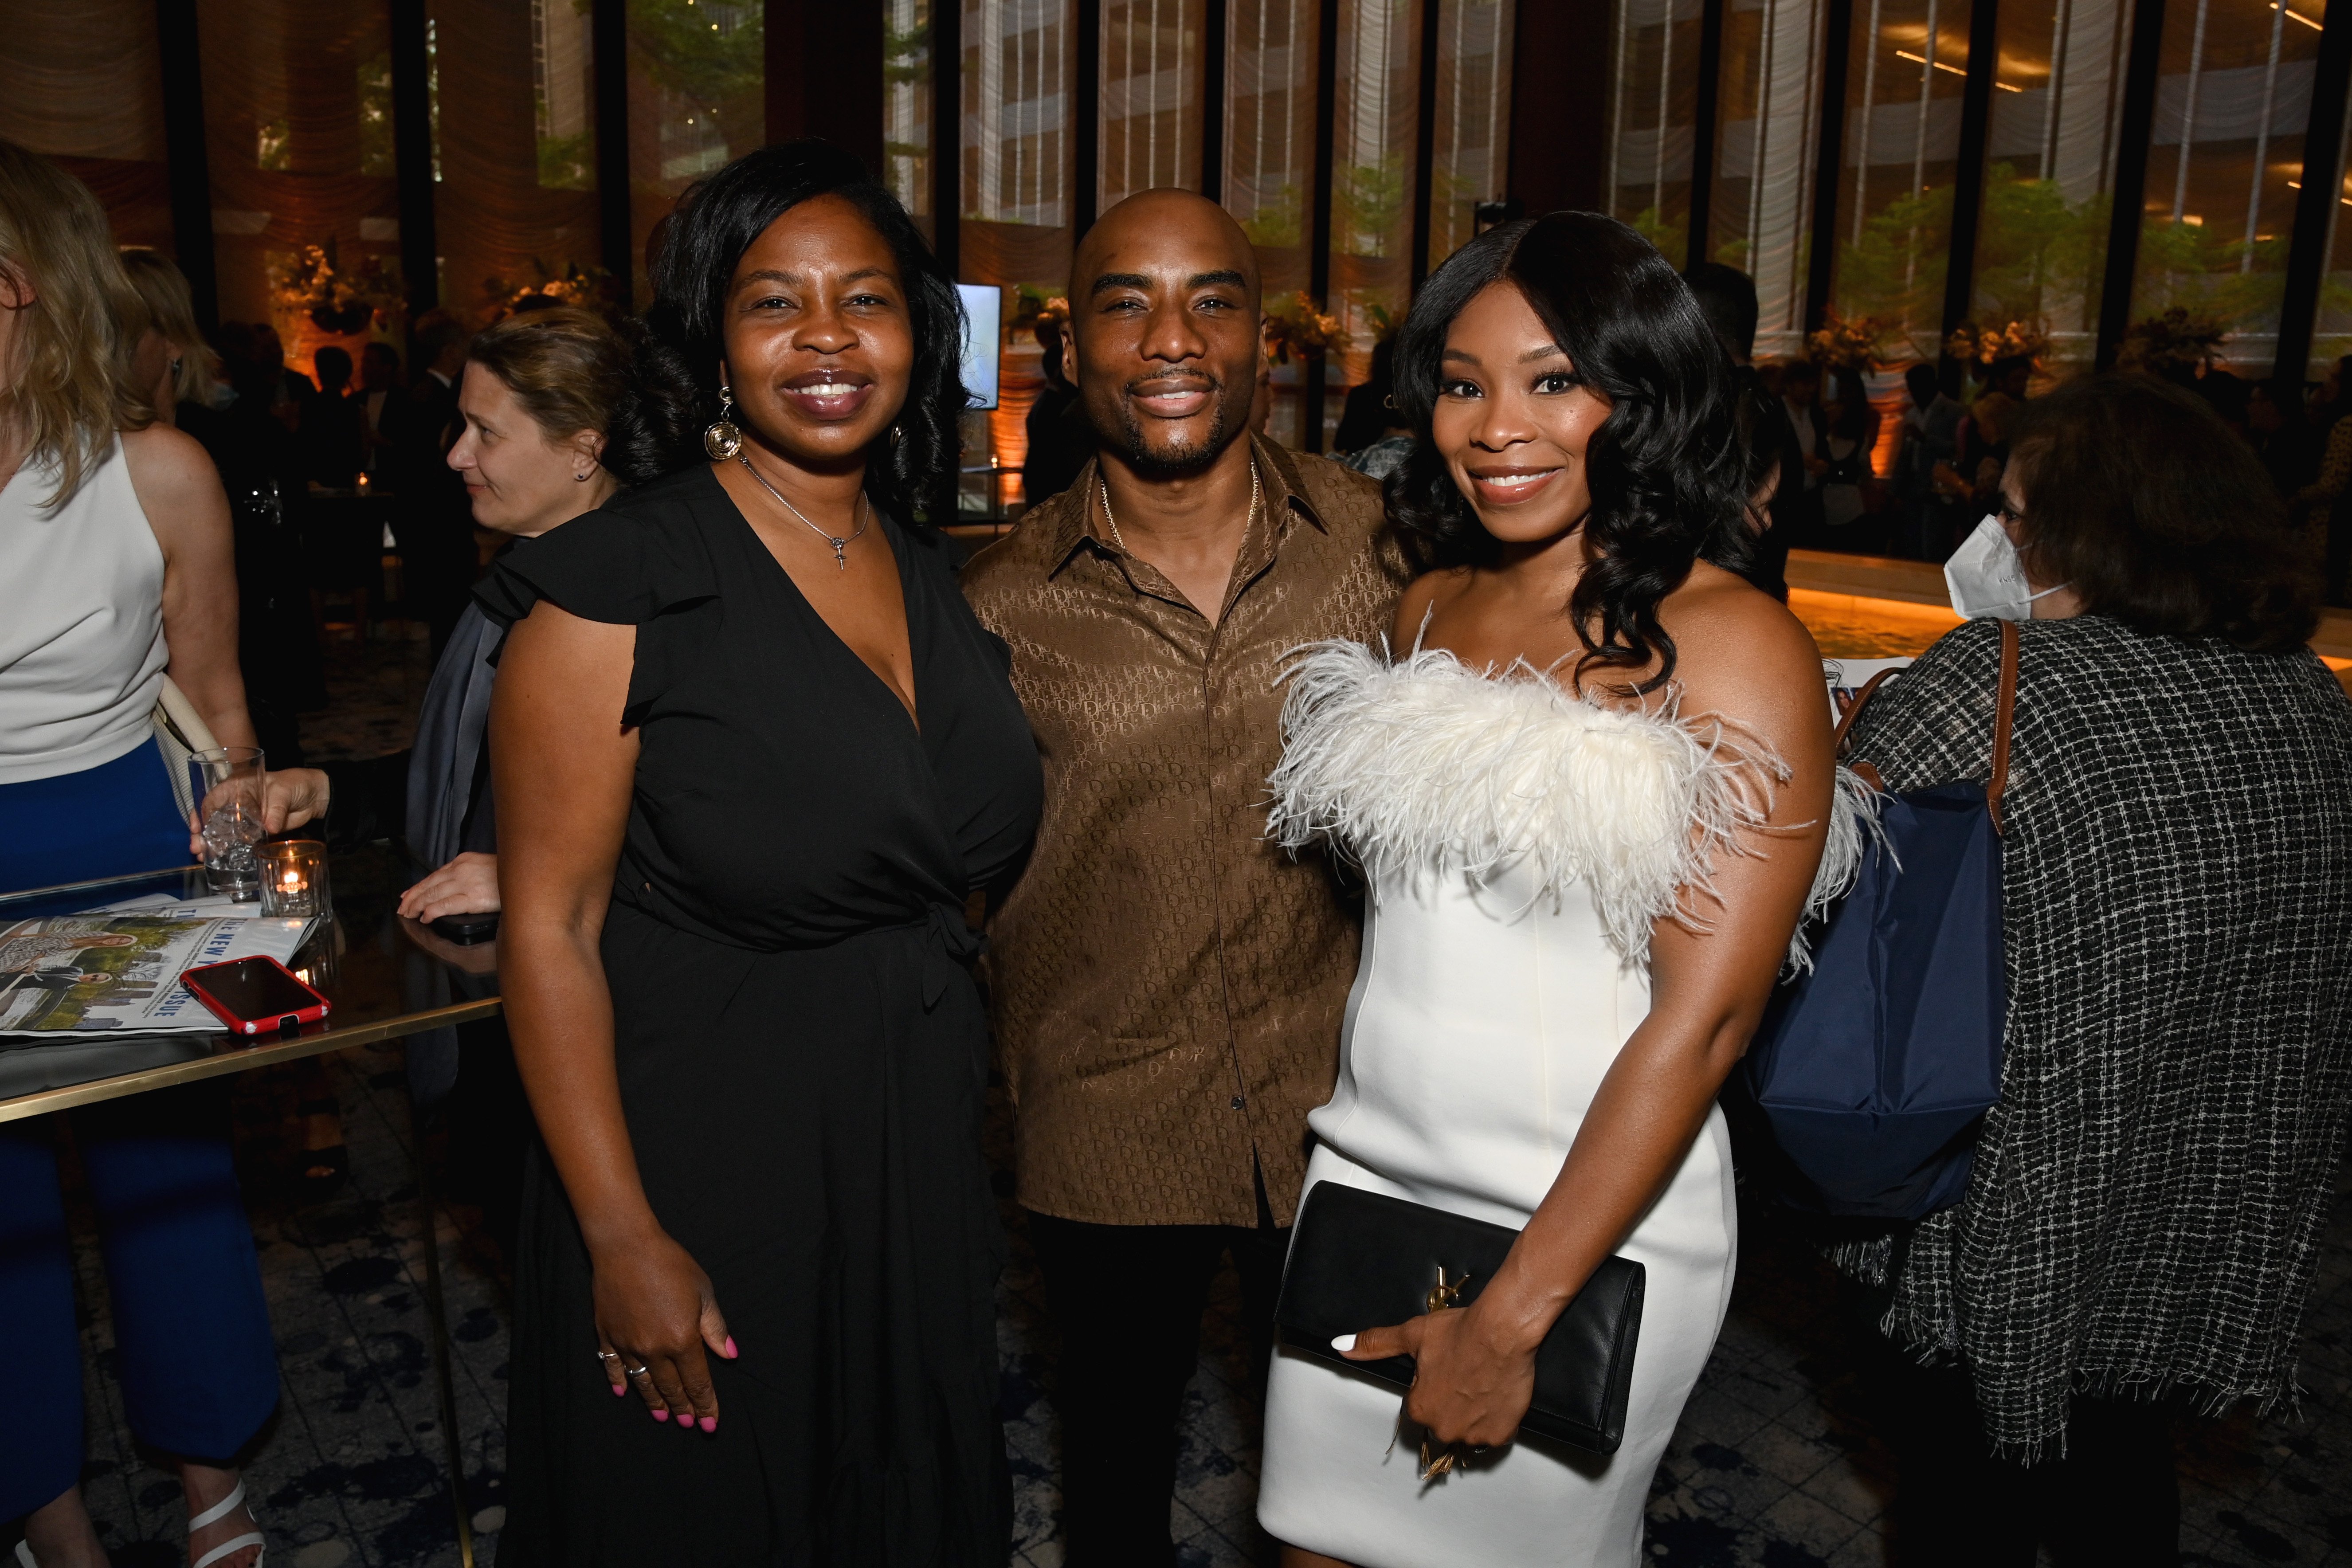 Nekesa Mumbi Moody, Charlamagne tha God, and Jessica Gadsden atThe Hollywood Reporter “Most Powerful People In Media” on May 17, 2022 in New York. |  Source: Getty Images